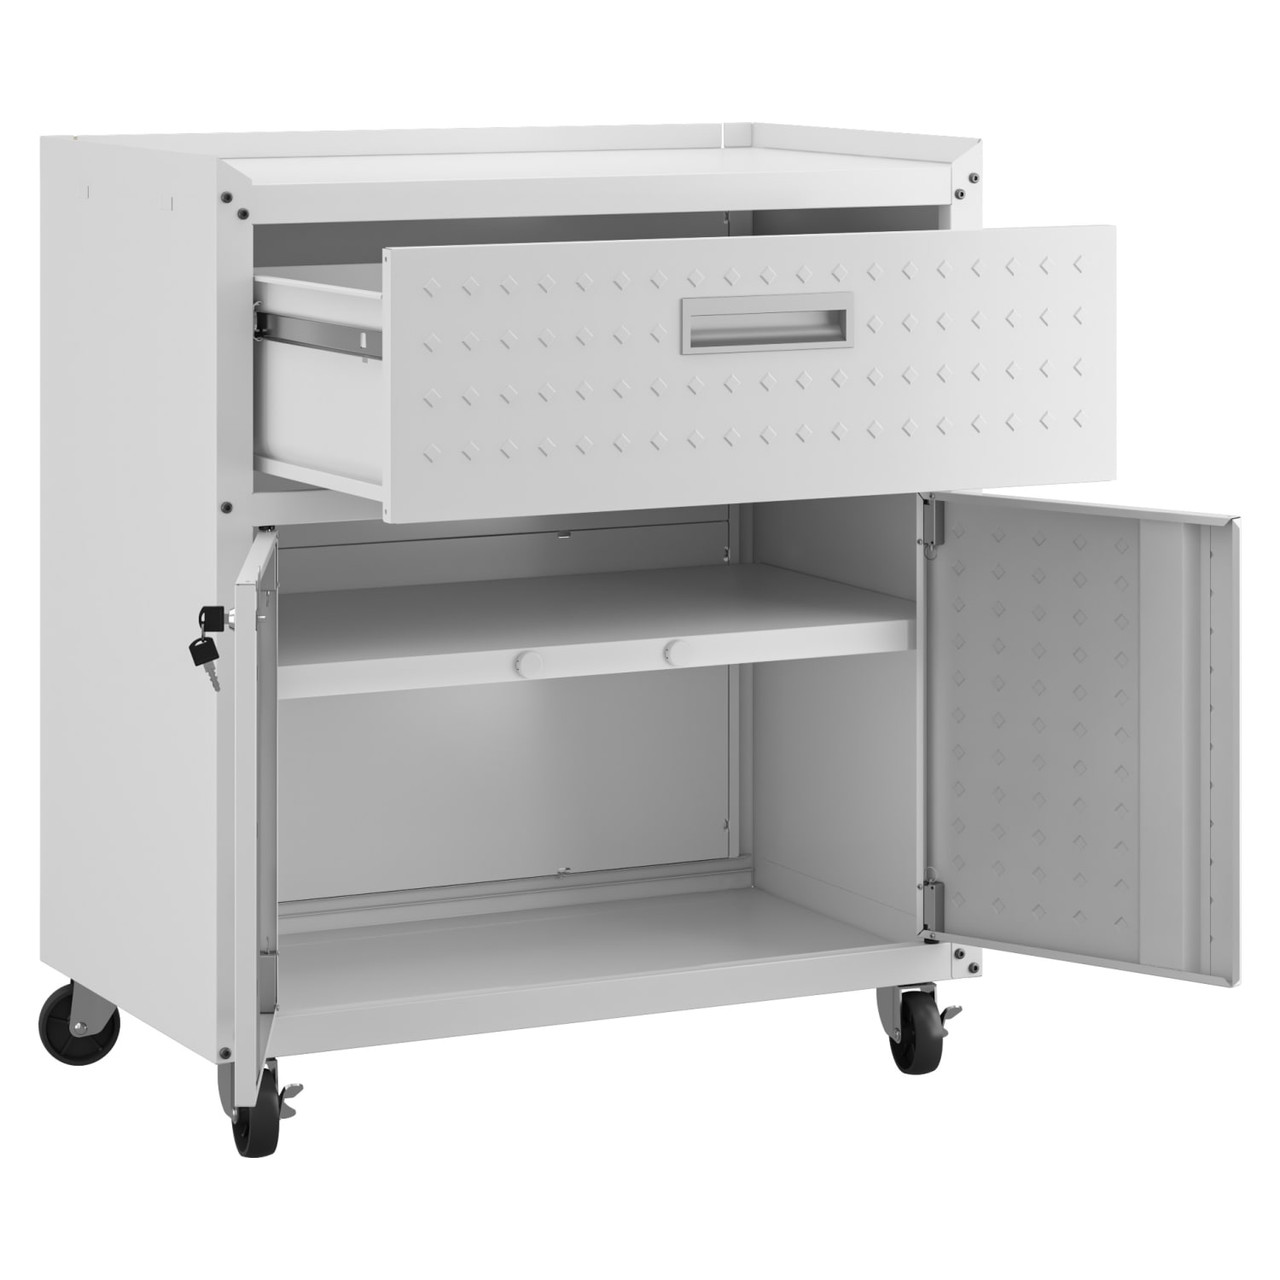 Fortress Textured Metal 31.5” Garage Mobile Cabinet with 1 Full Extension Drawer and 2 Adjustable Shelves in White